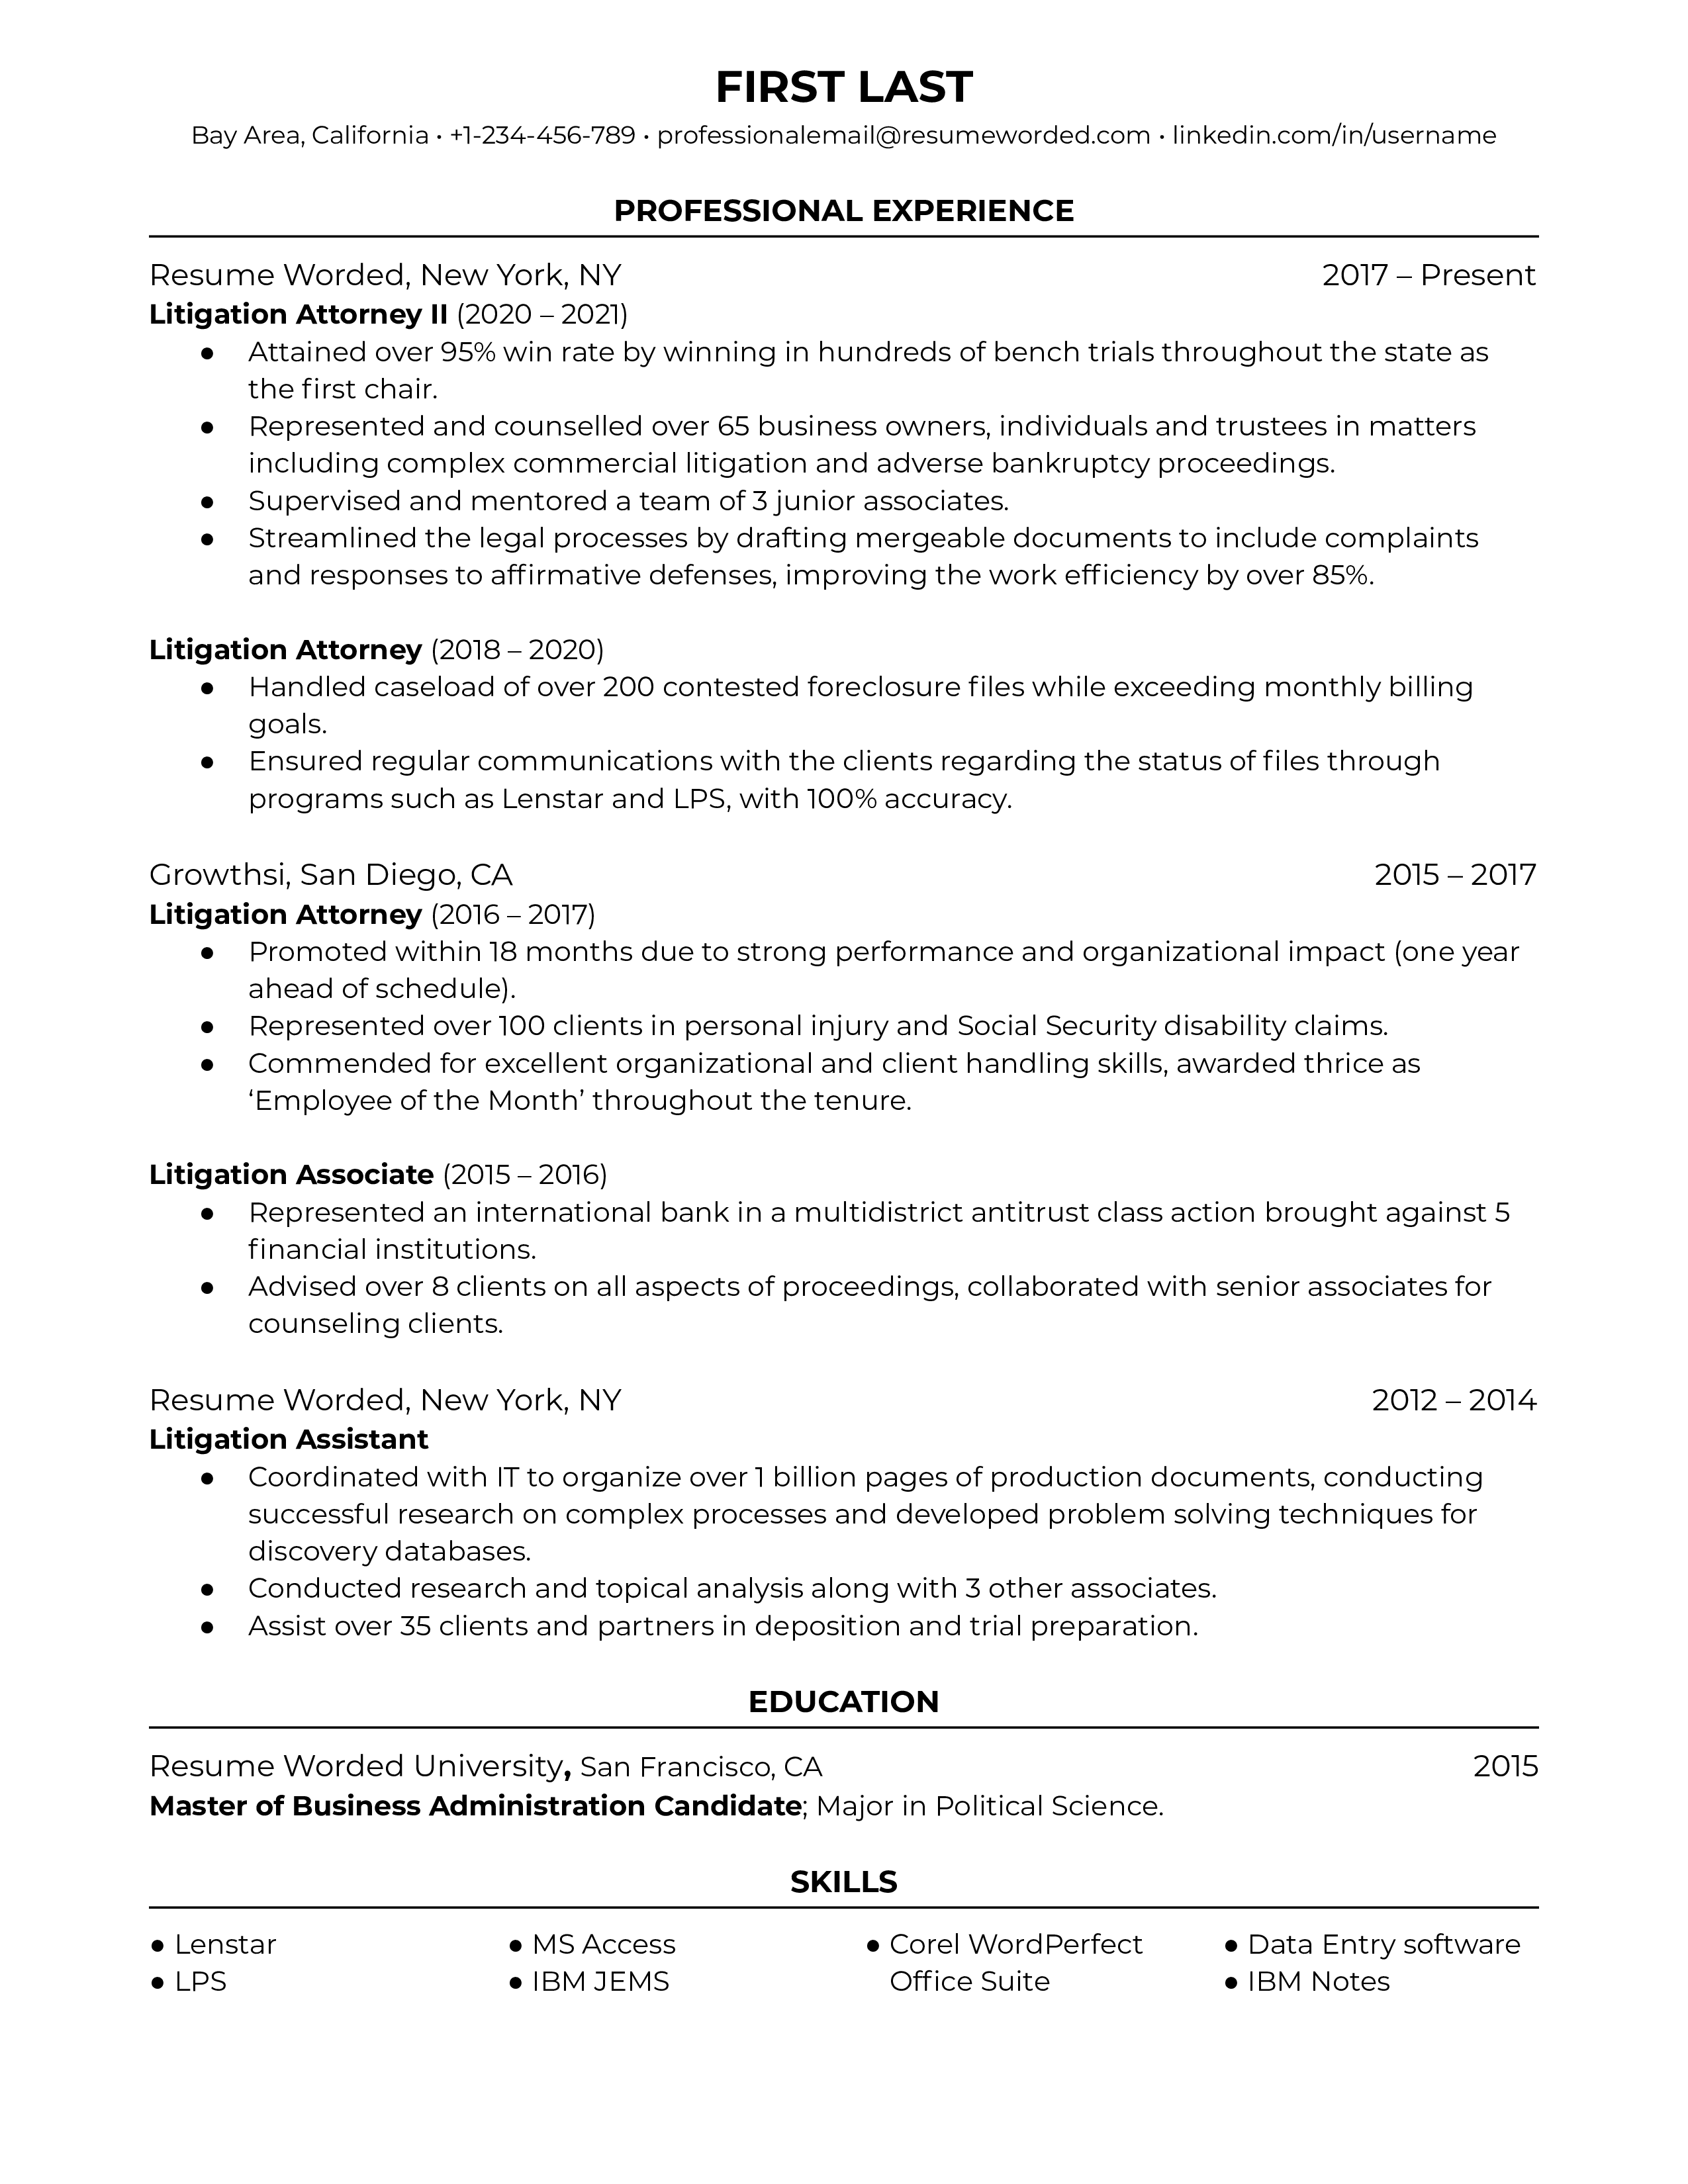 Litigation Attorney resume showcasing experience and research skills